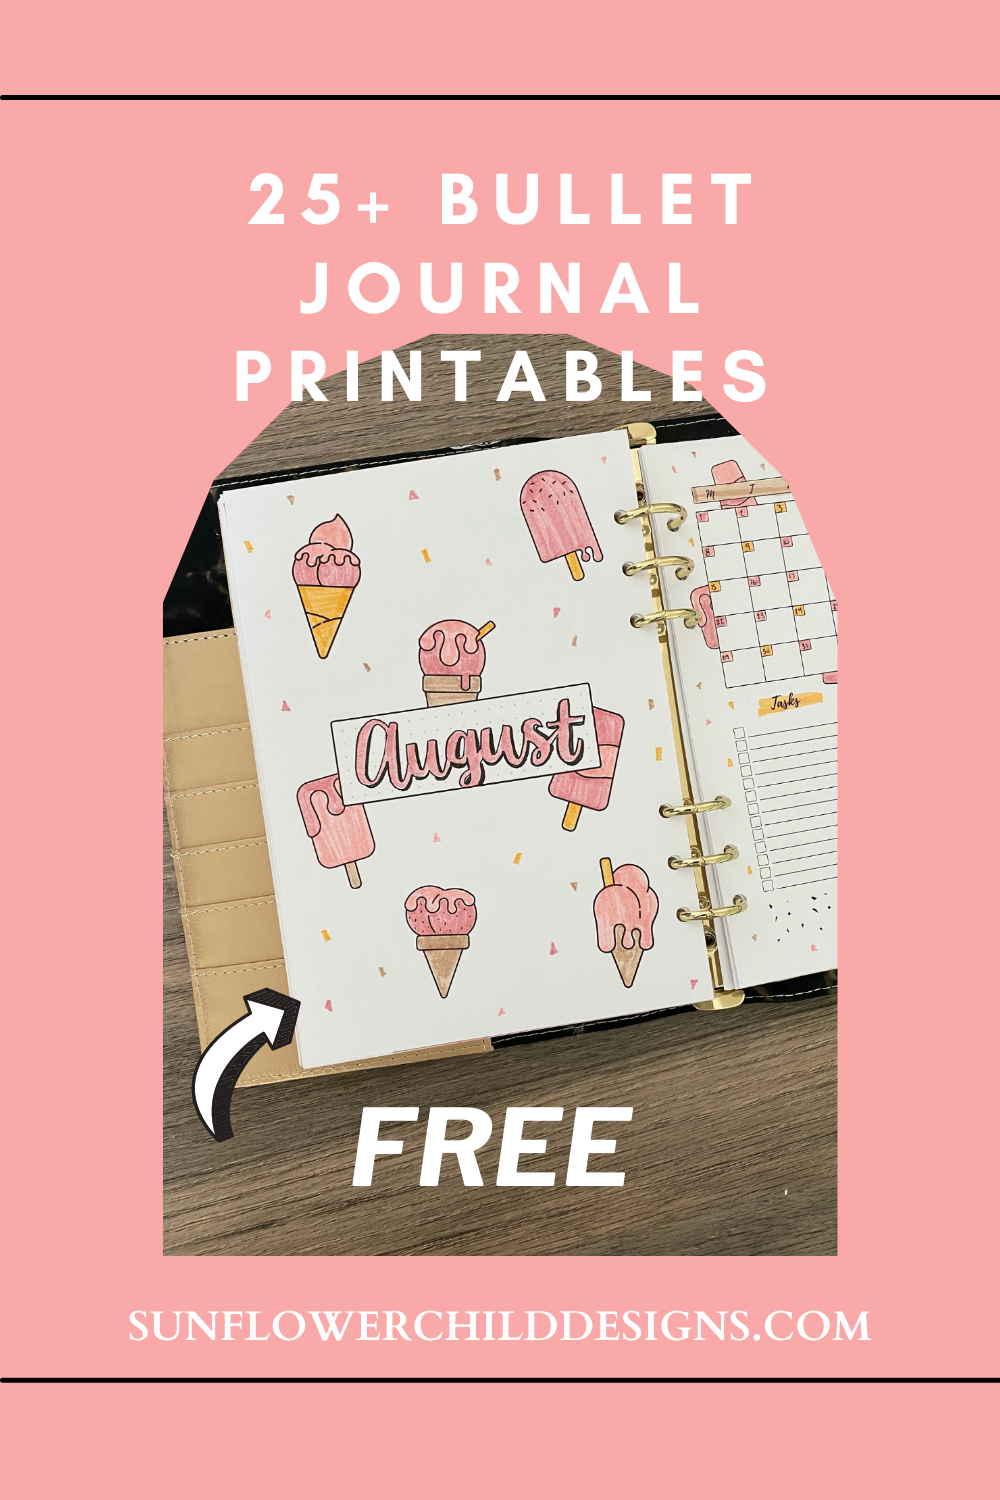 Your Bullet Journaling Beliefs Challenged: These Printables Aren't Childish!